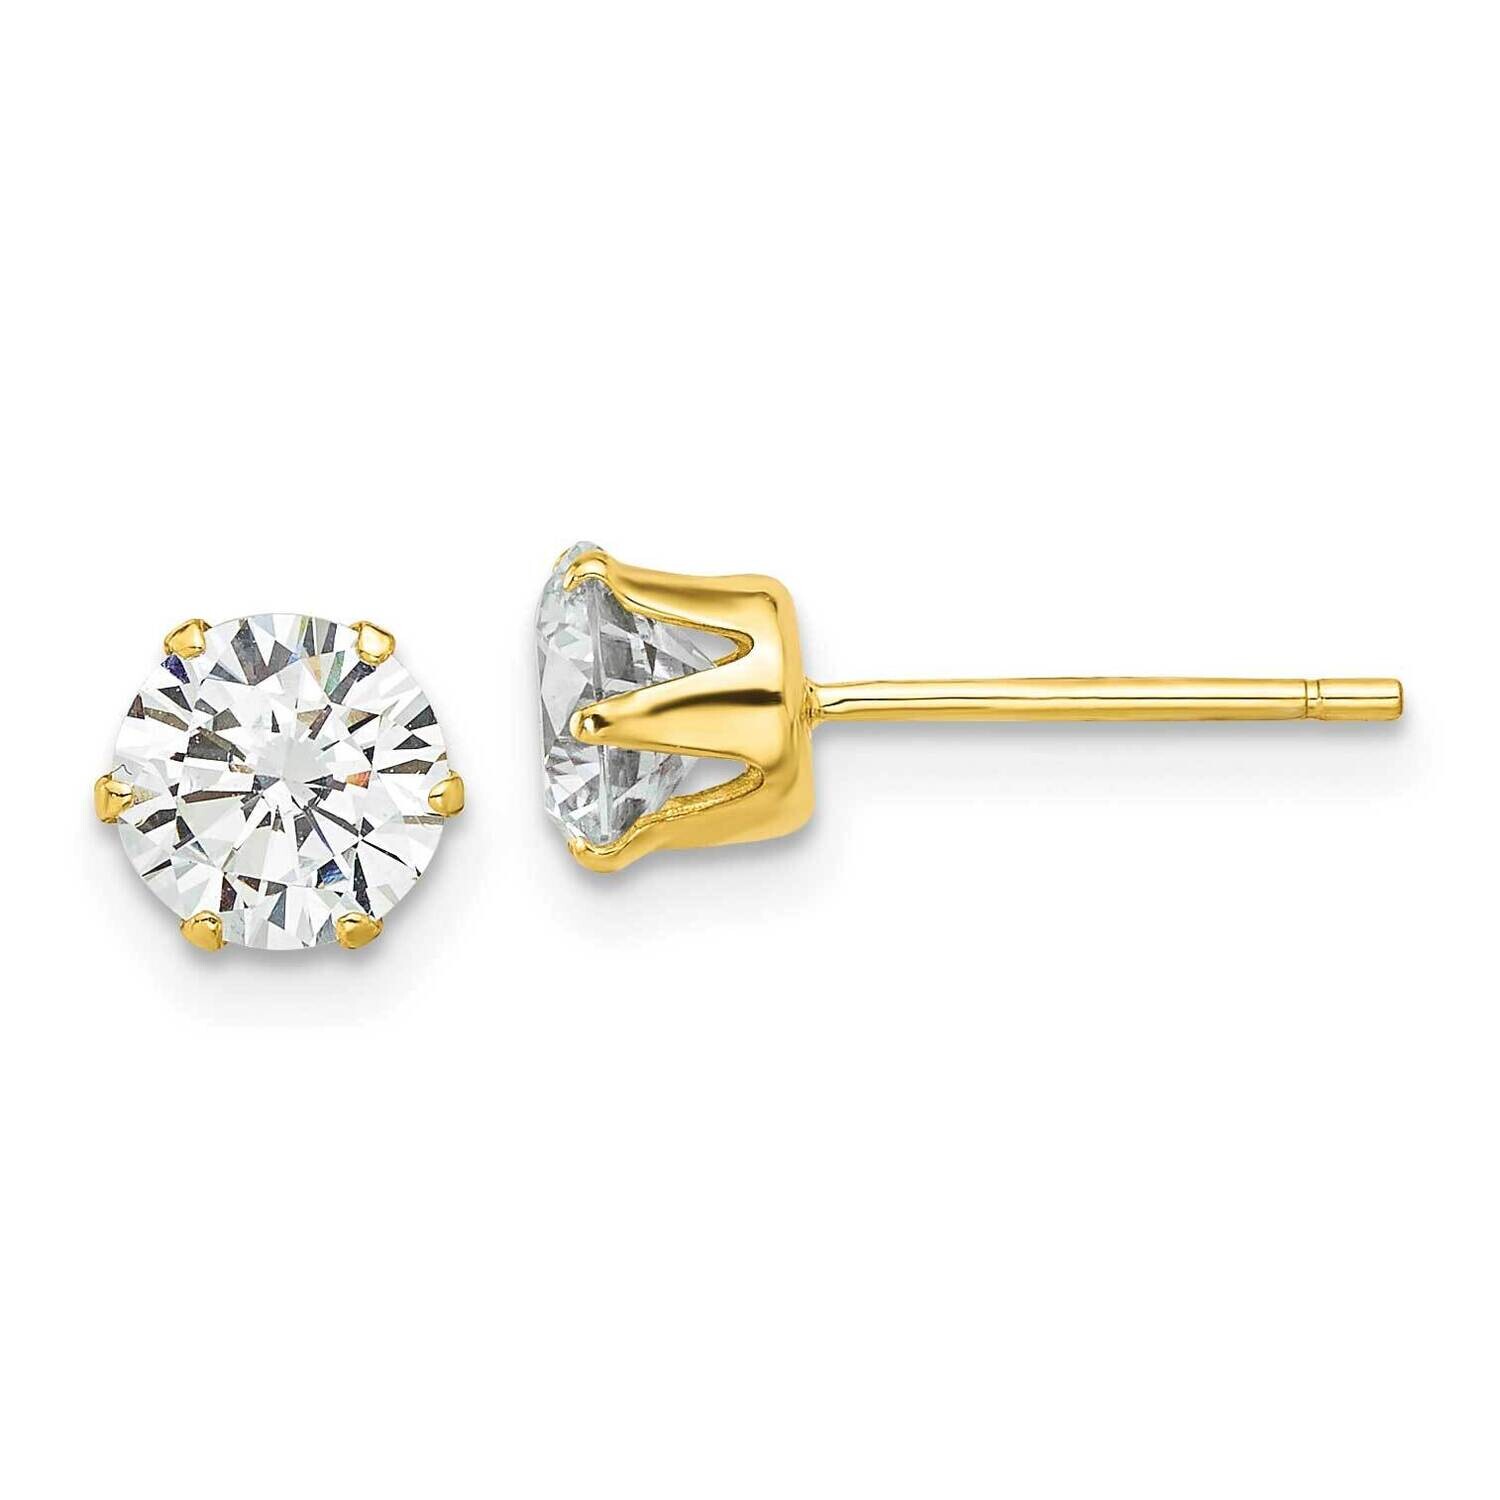 Gold-Tone Polished 6 Prong 6mm CZ Post Stud Earrings Sterling Silver QE17107GP